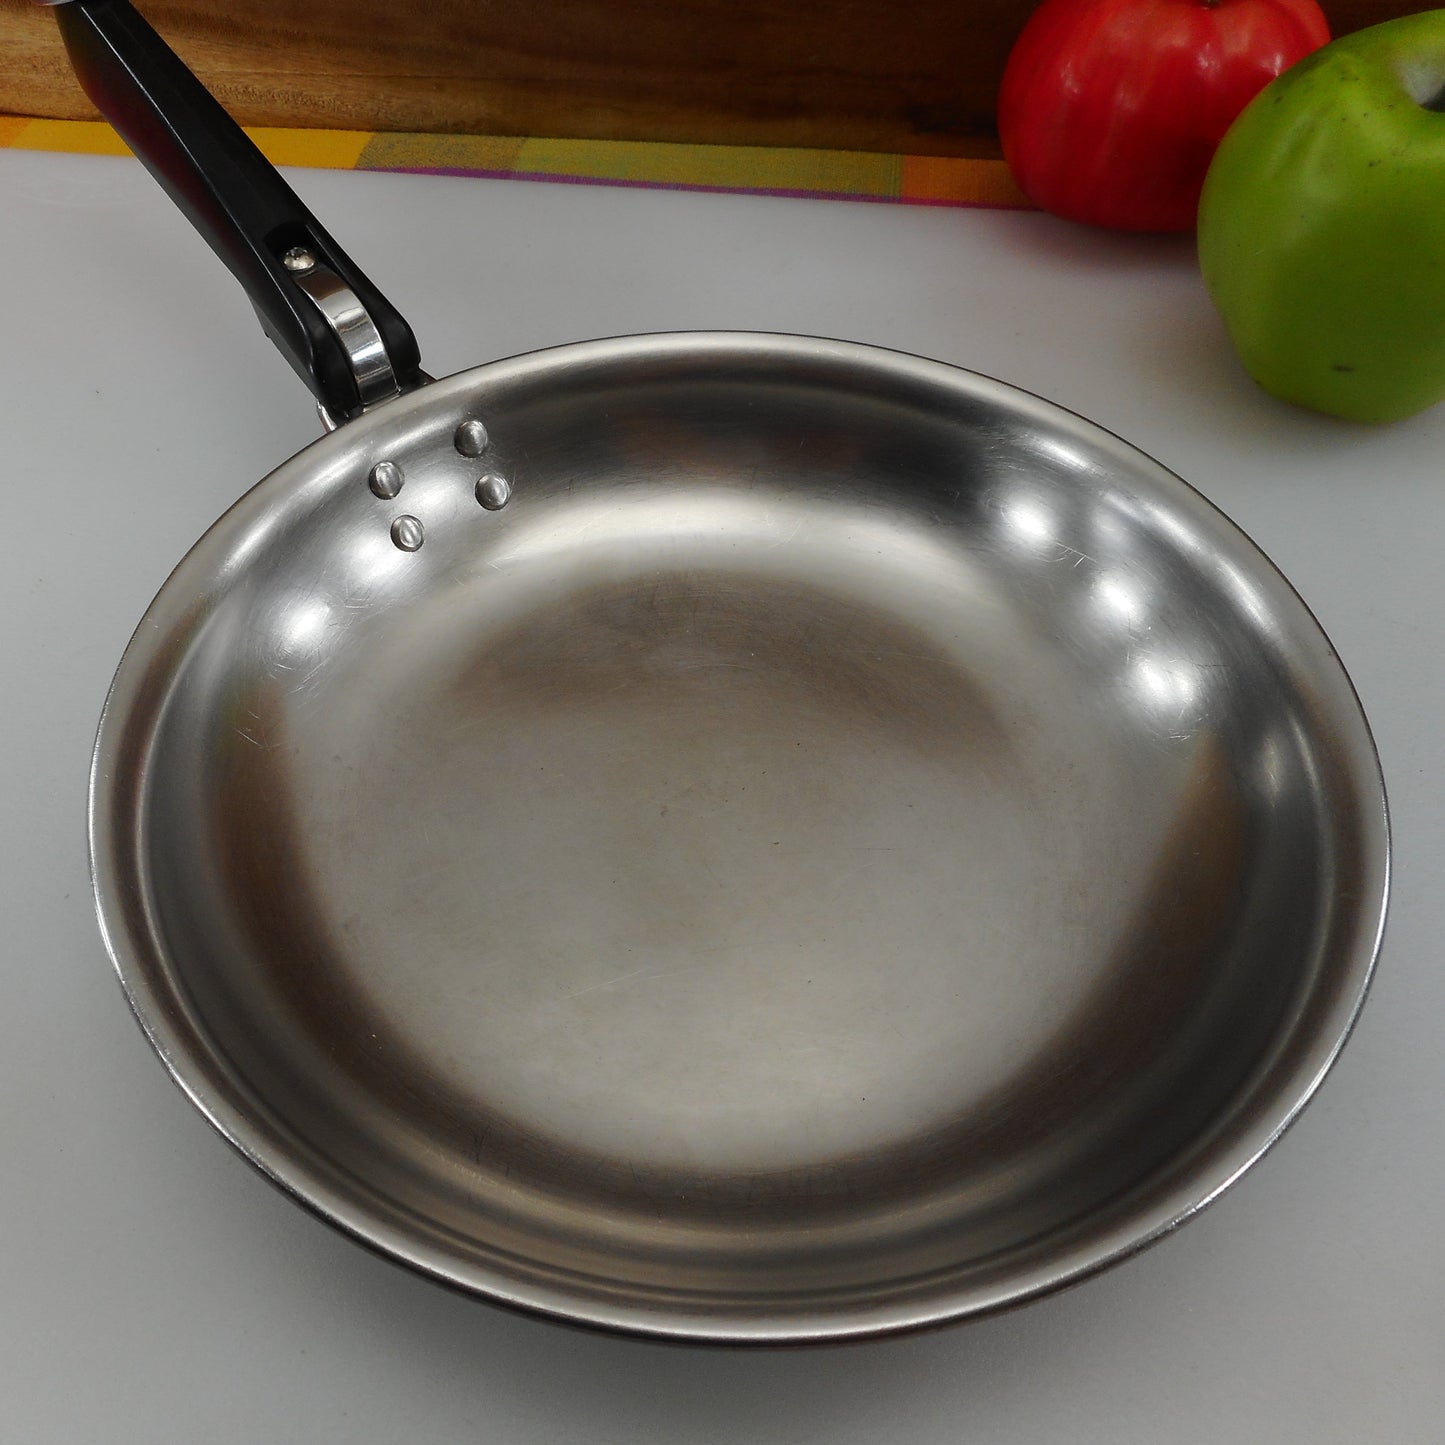 Farberware Omelet Chef Pan Skillet - Aluminum Clad Stainless 8" Used